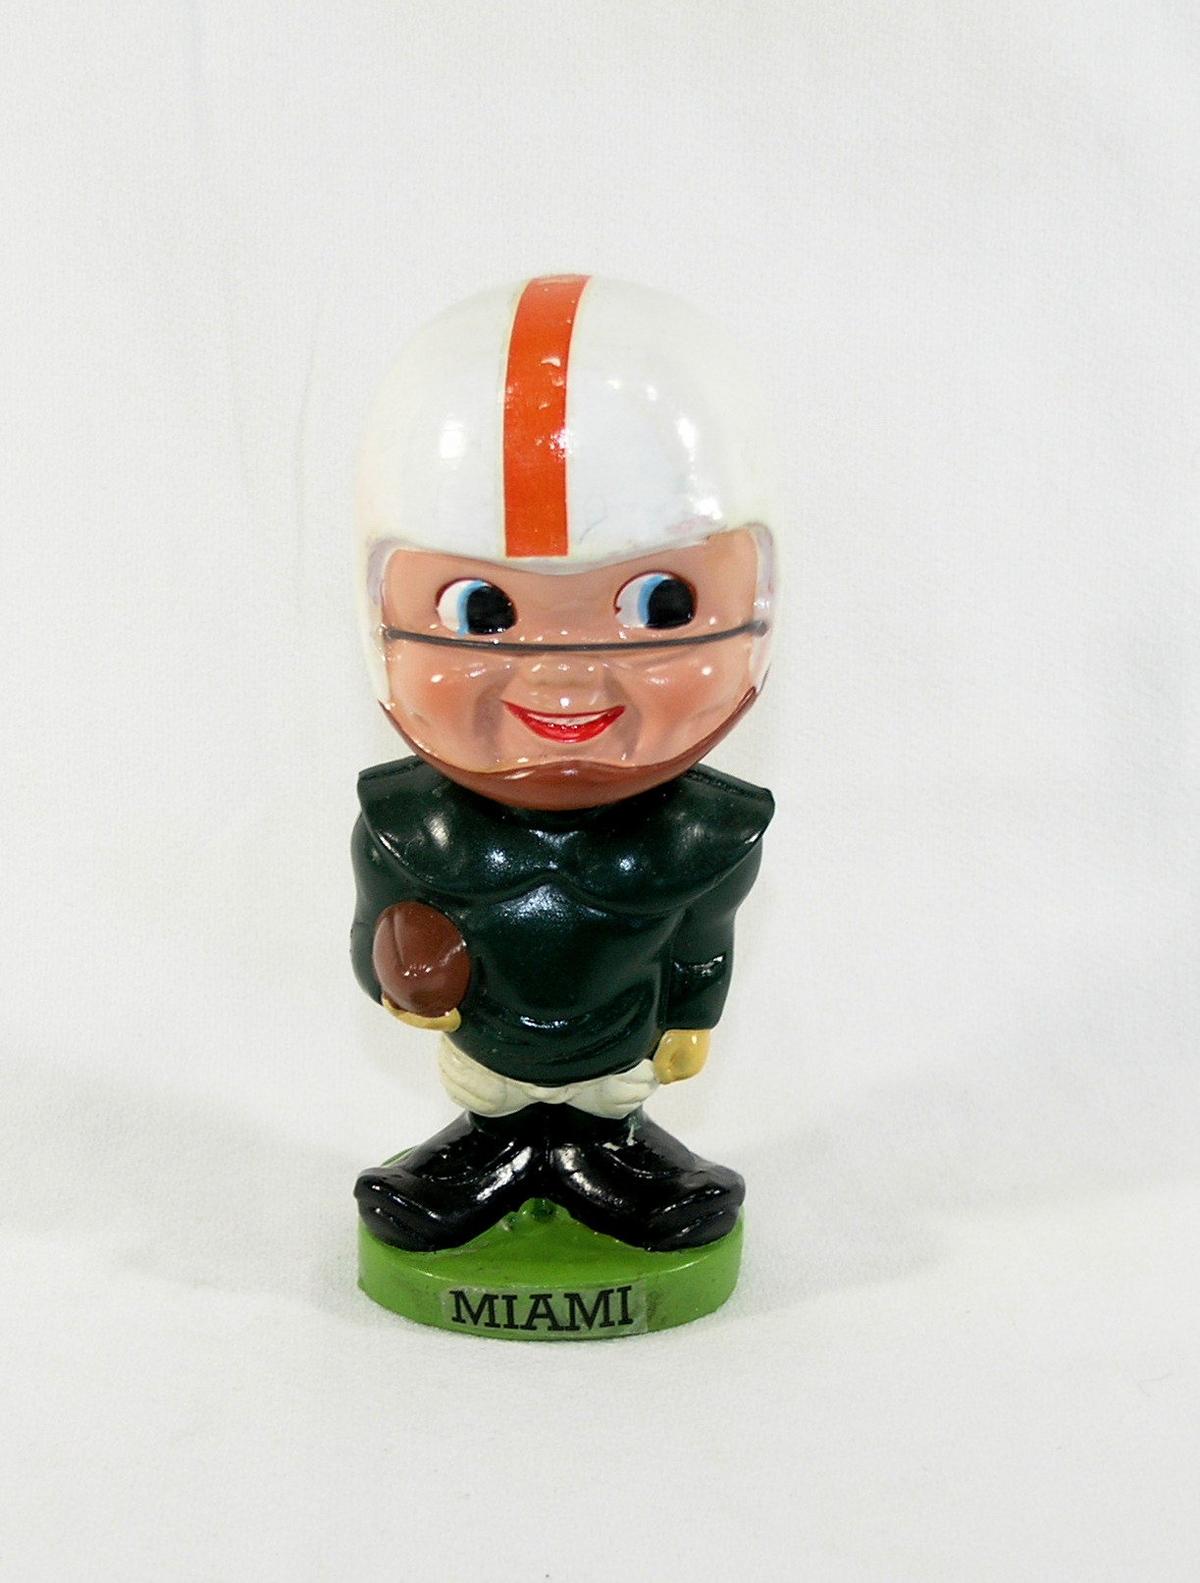 1960s Miami Hurricanes College Football Toes-up Bobblehead.